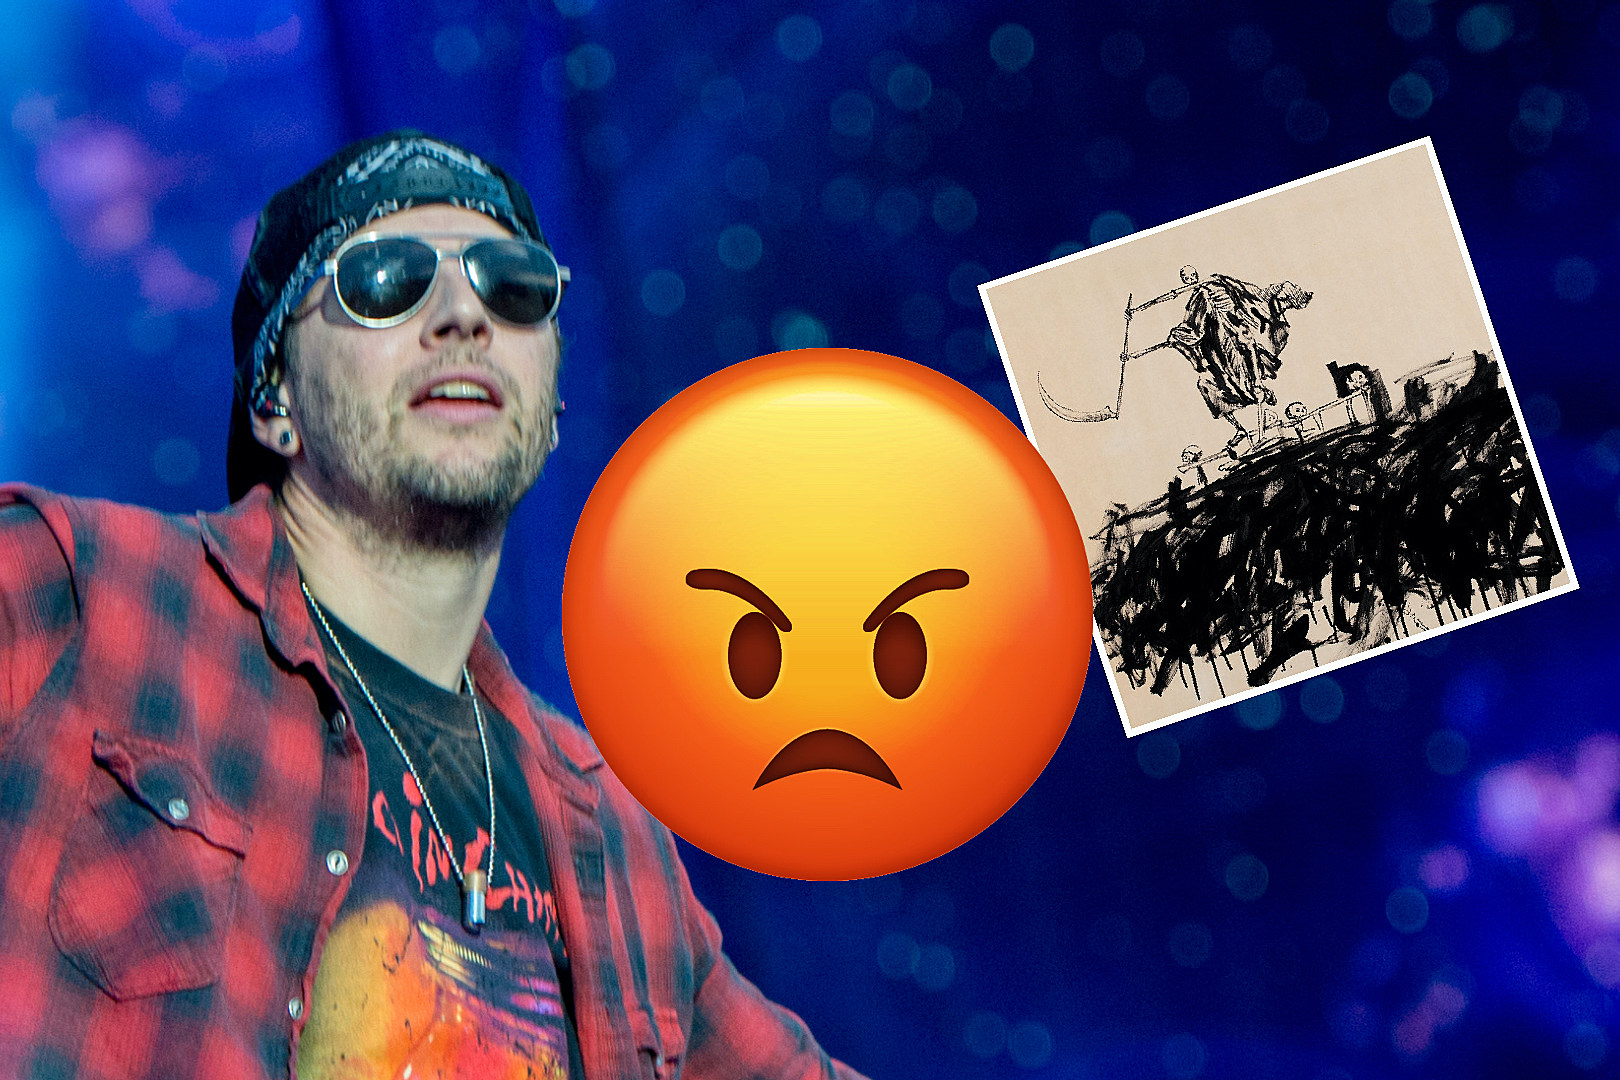 How AVENGED SEVENFOLD changed metal forever (they were HATED